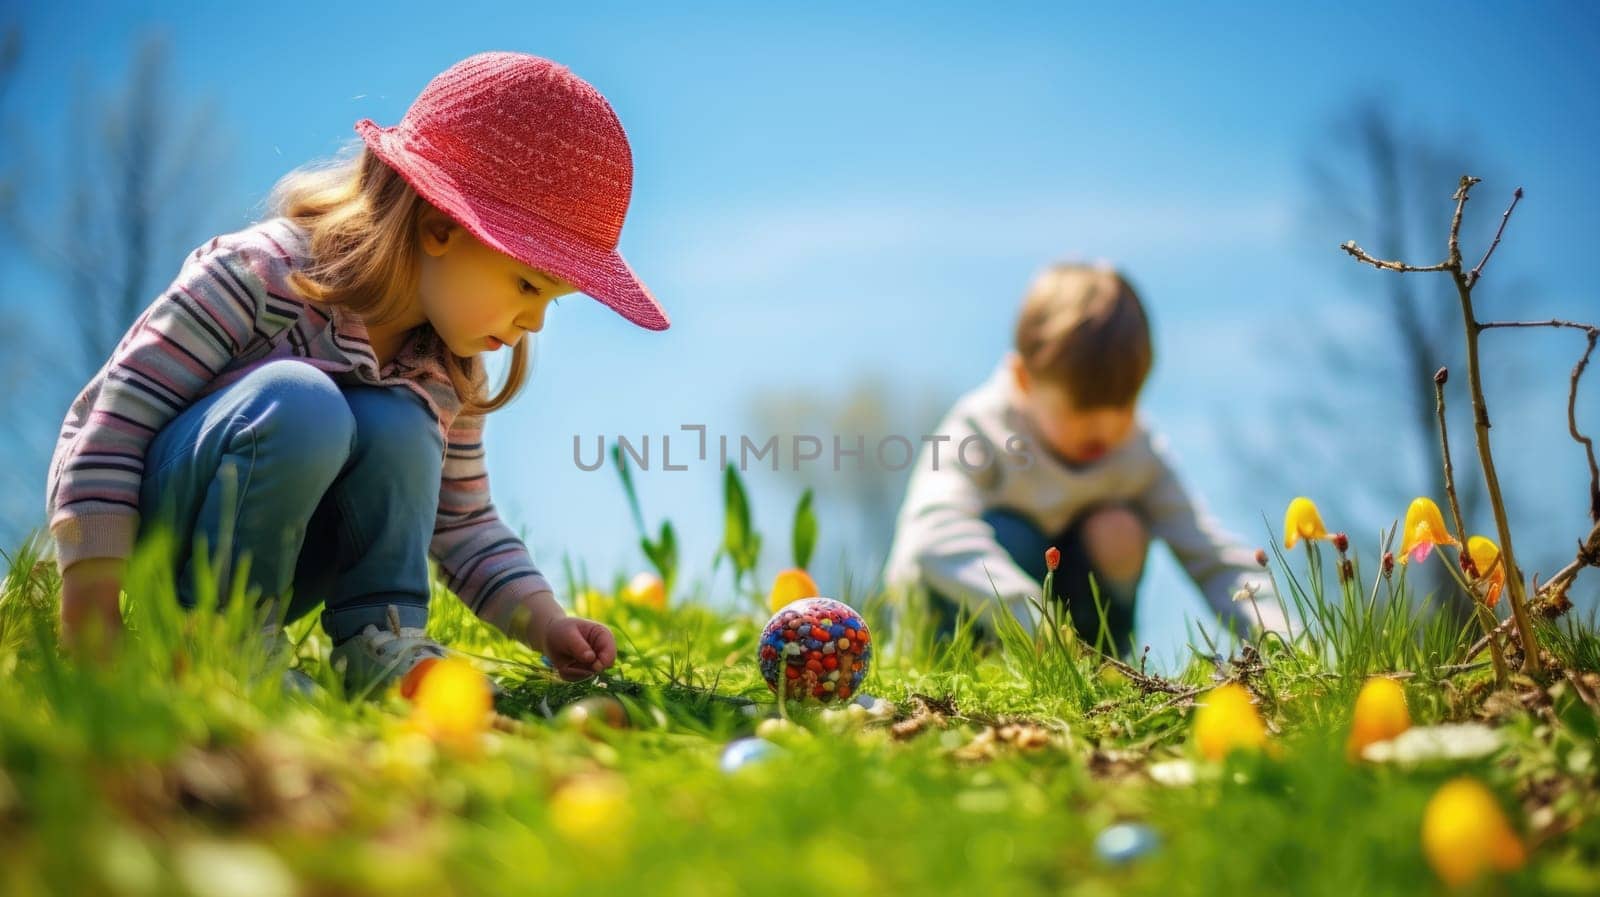 Children searching for colorful Easter eggs in lush green grass on a sunny spring day, enjoying the excitement and joy of the holiday tradition. Perfect for Easter or spring-themed designs.